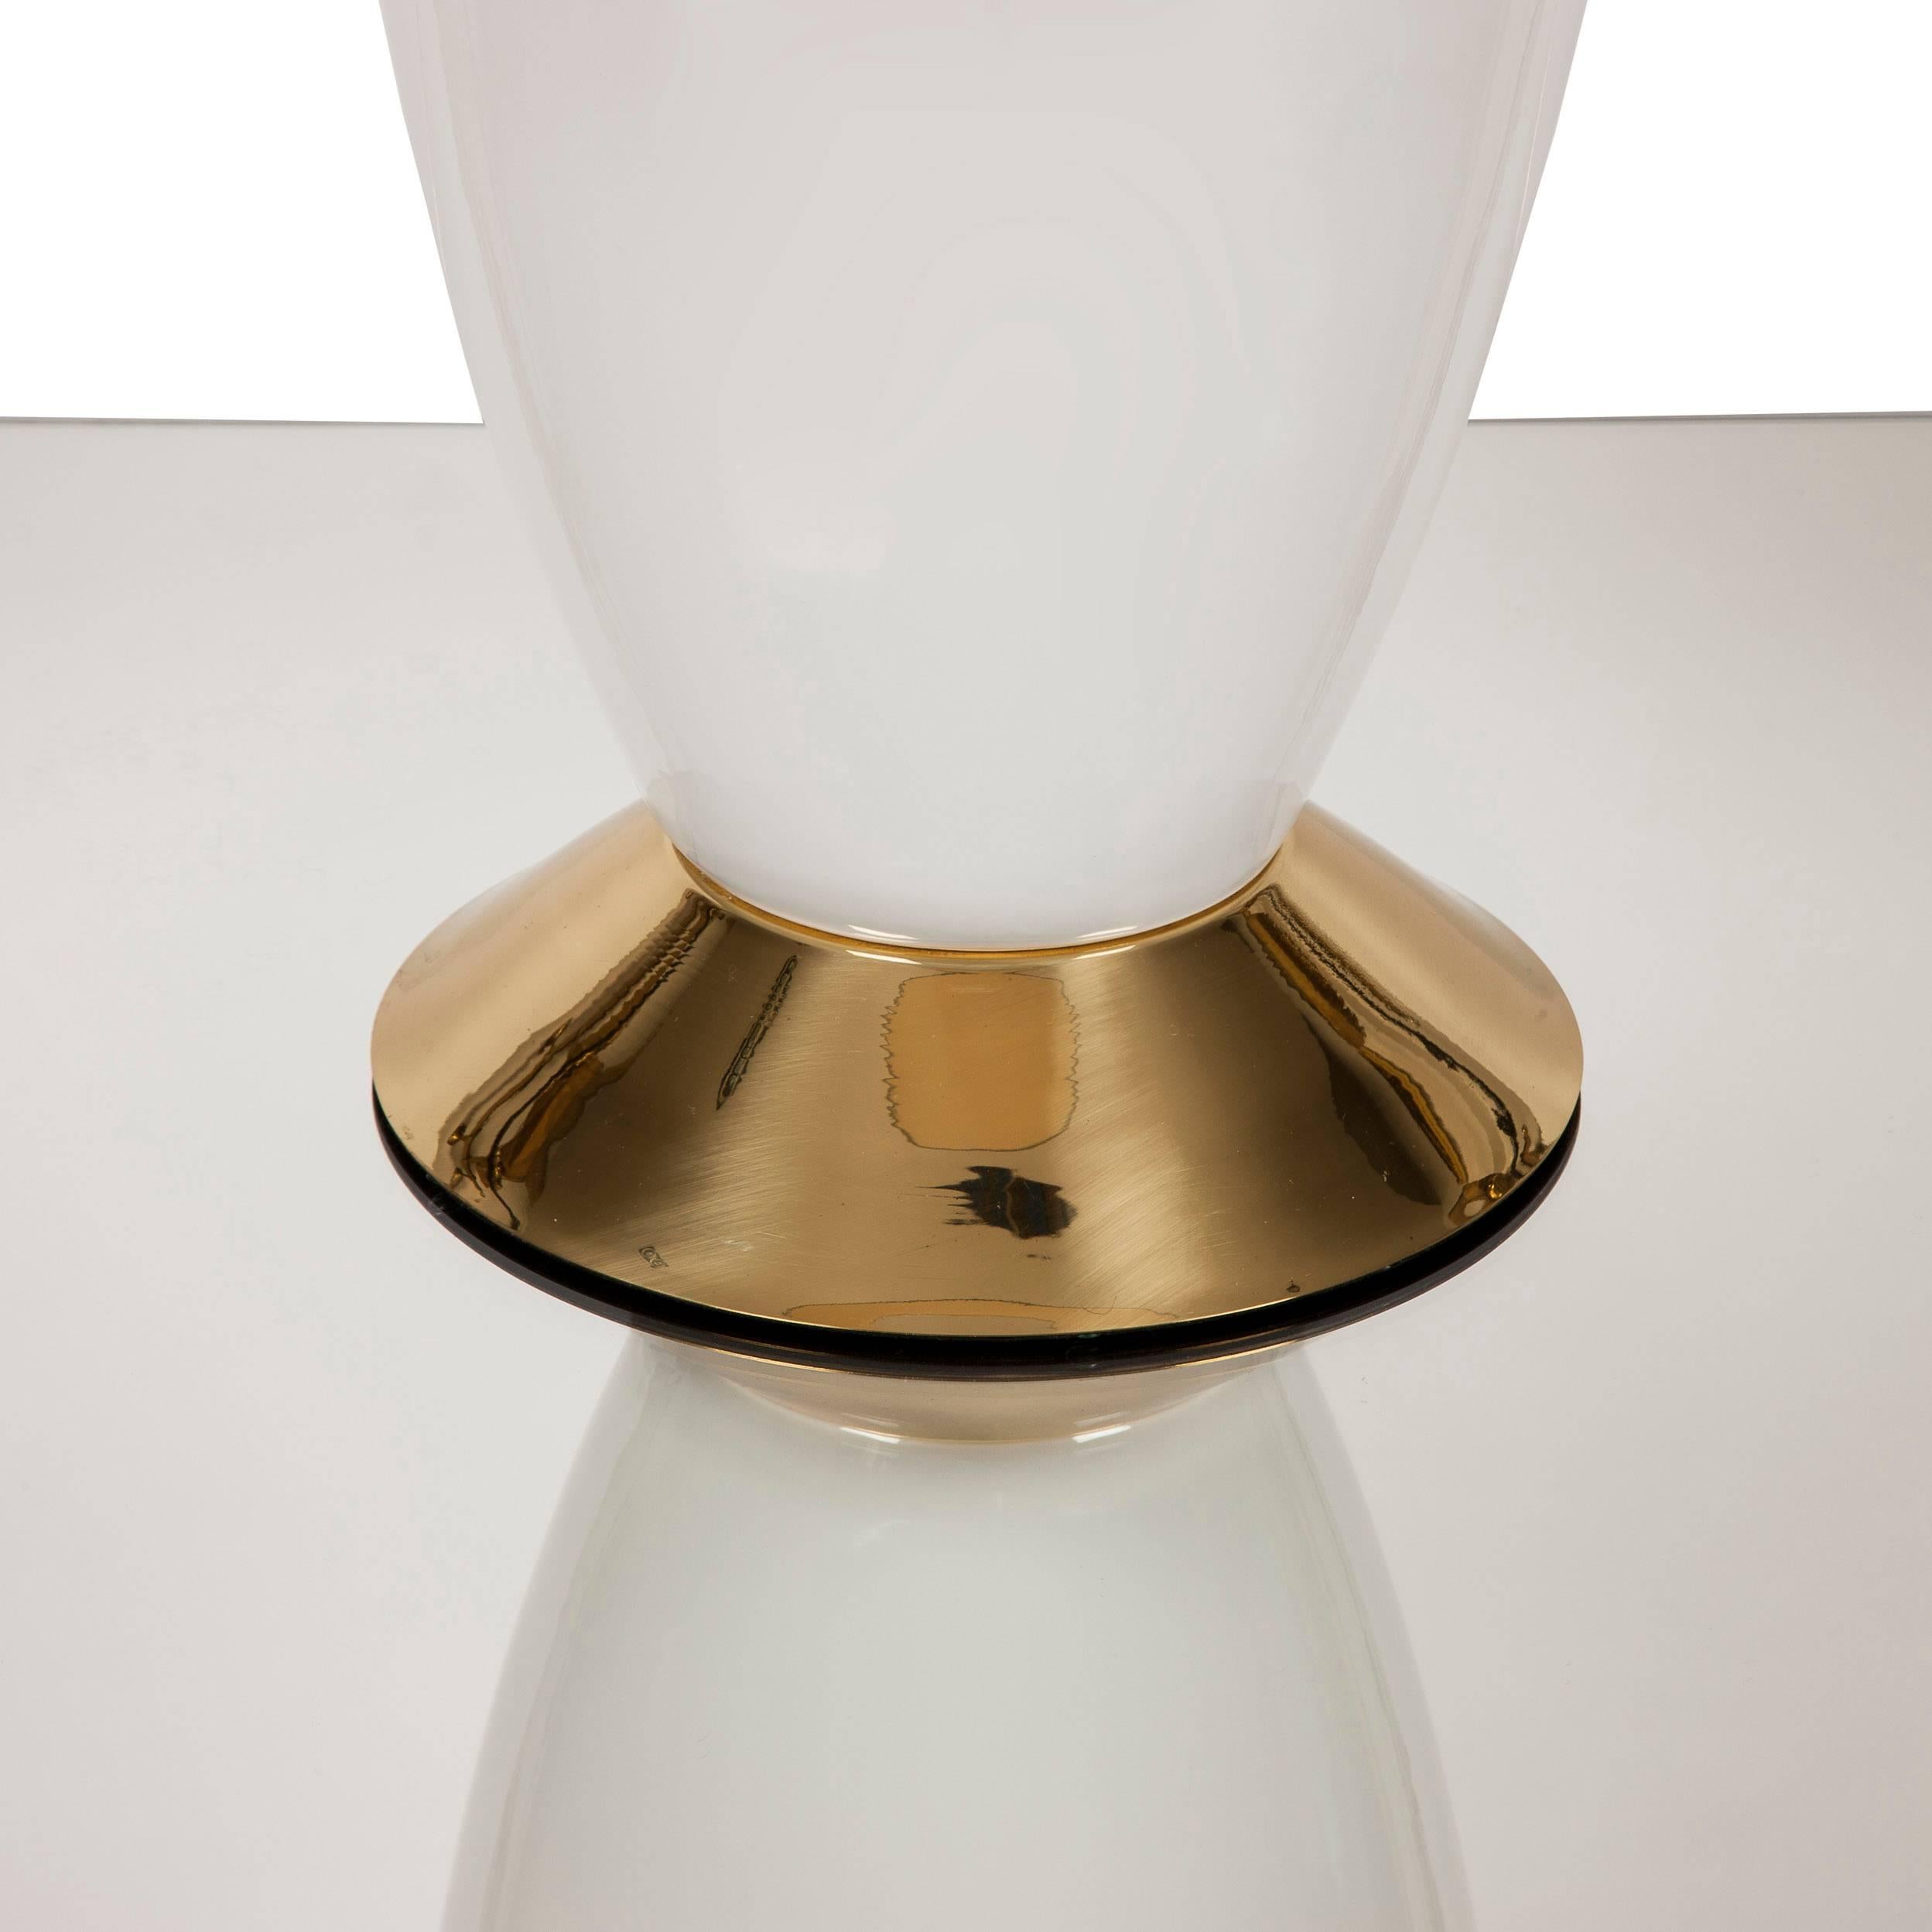 Large ceramic table lamp on polished brass base. A classically inspired piece with elegant lines and shape. 

Measures: 62 cm high x 25 cm diameter

Lampshade is not included.